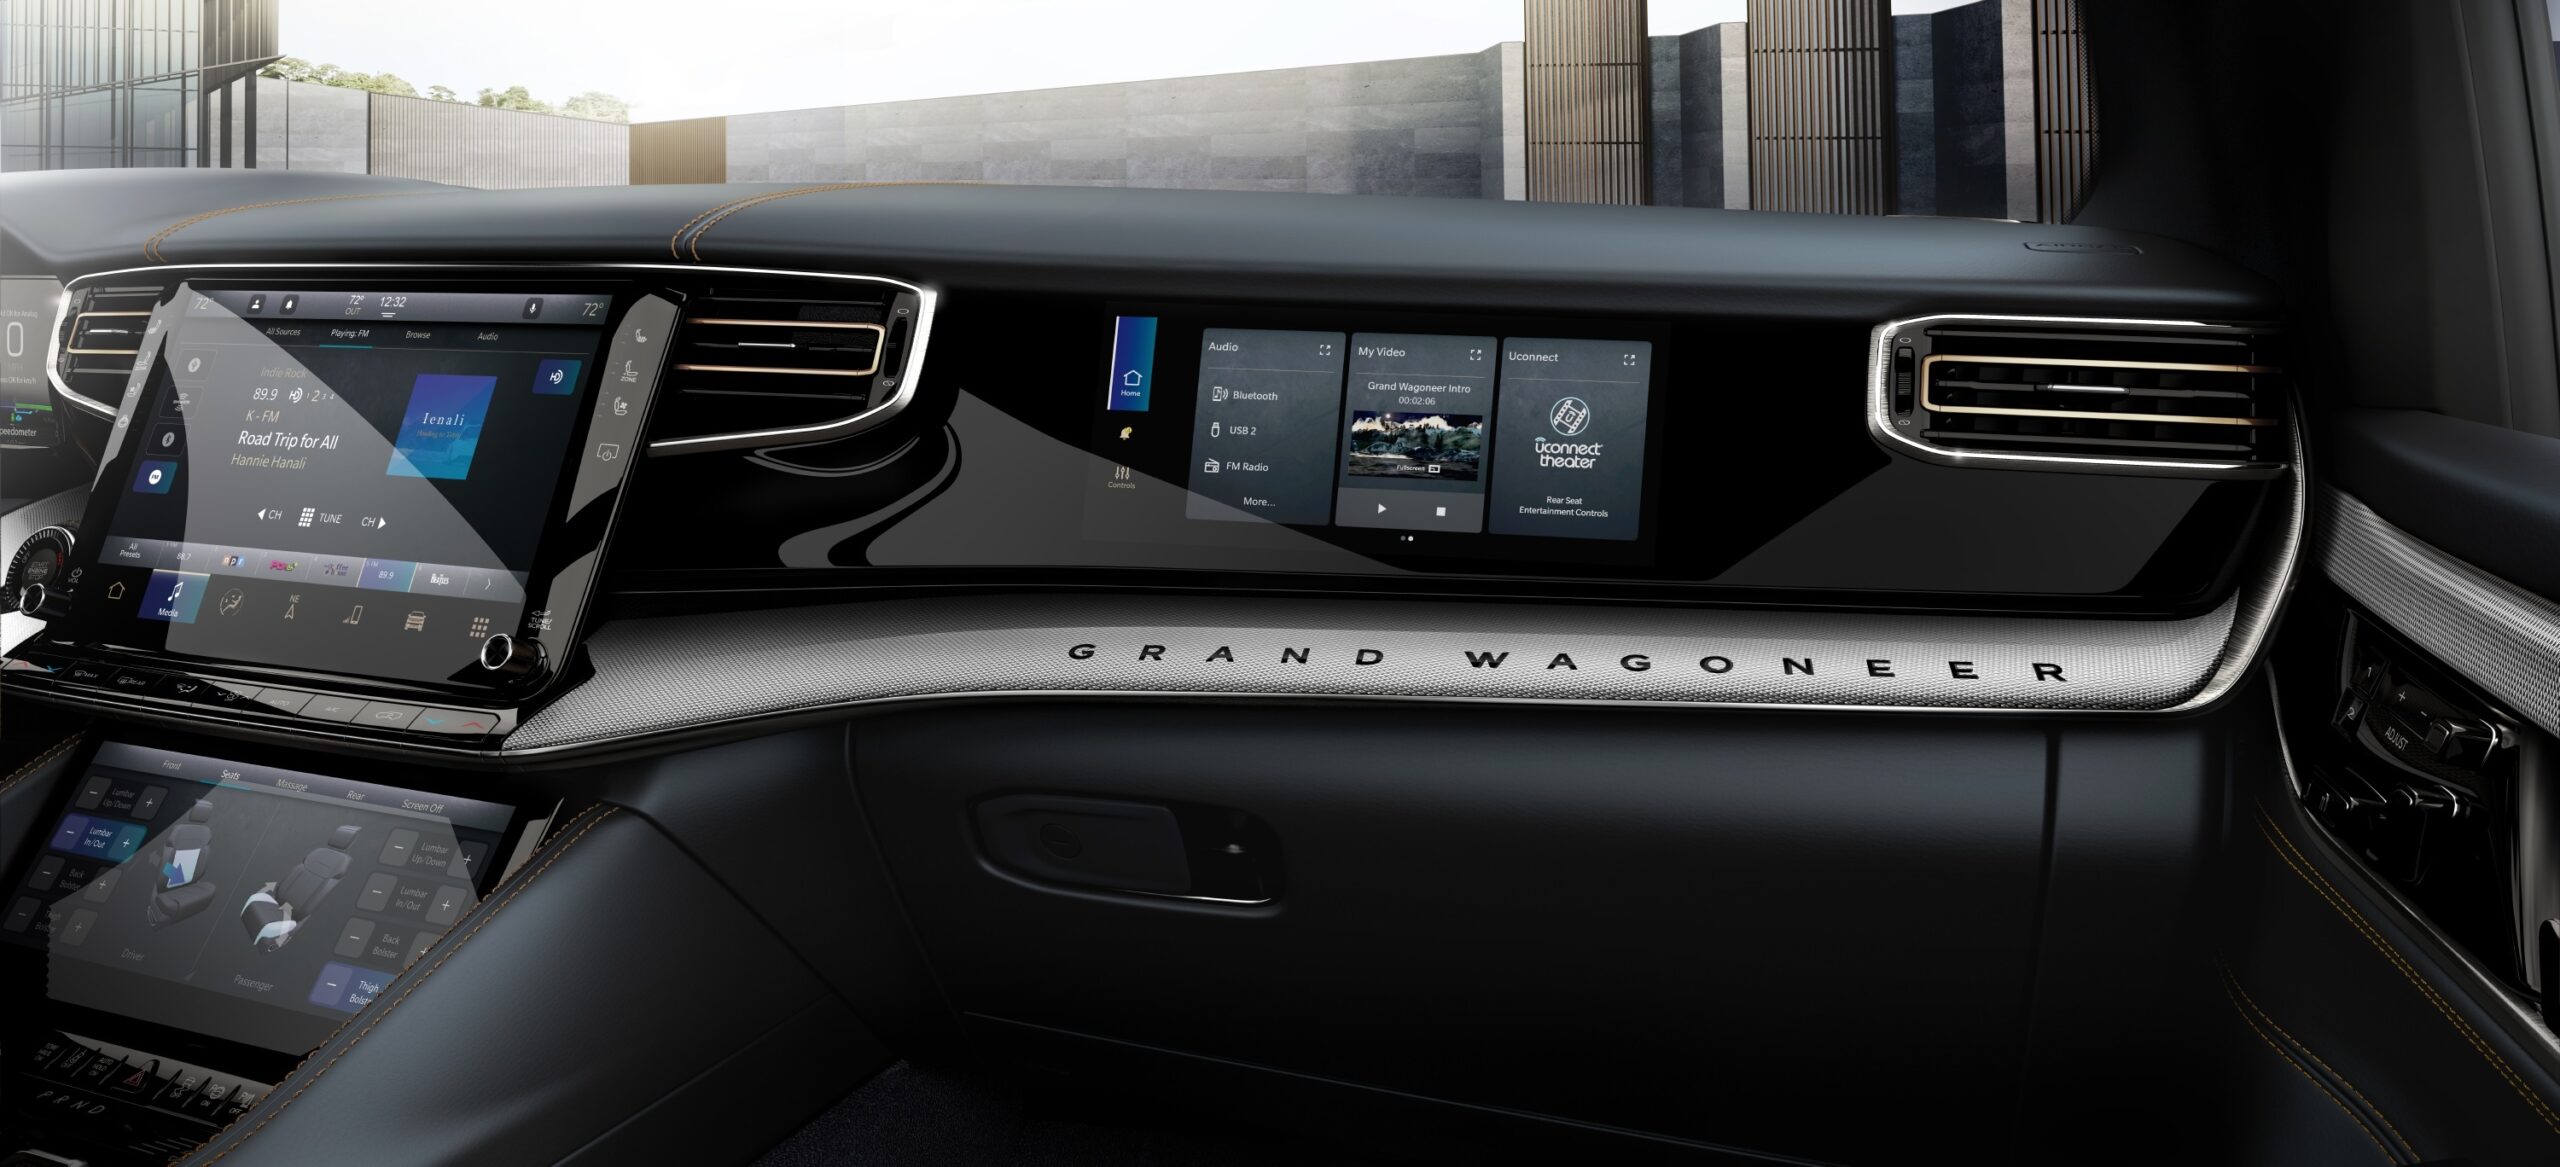 The passenger side 10.25 inch wide touch screen of controls